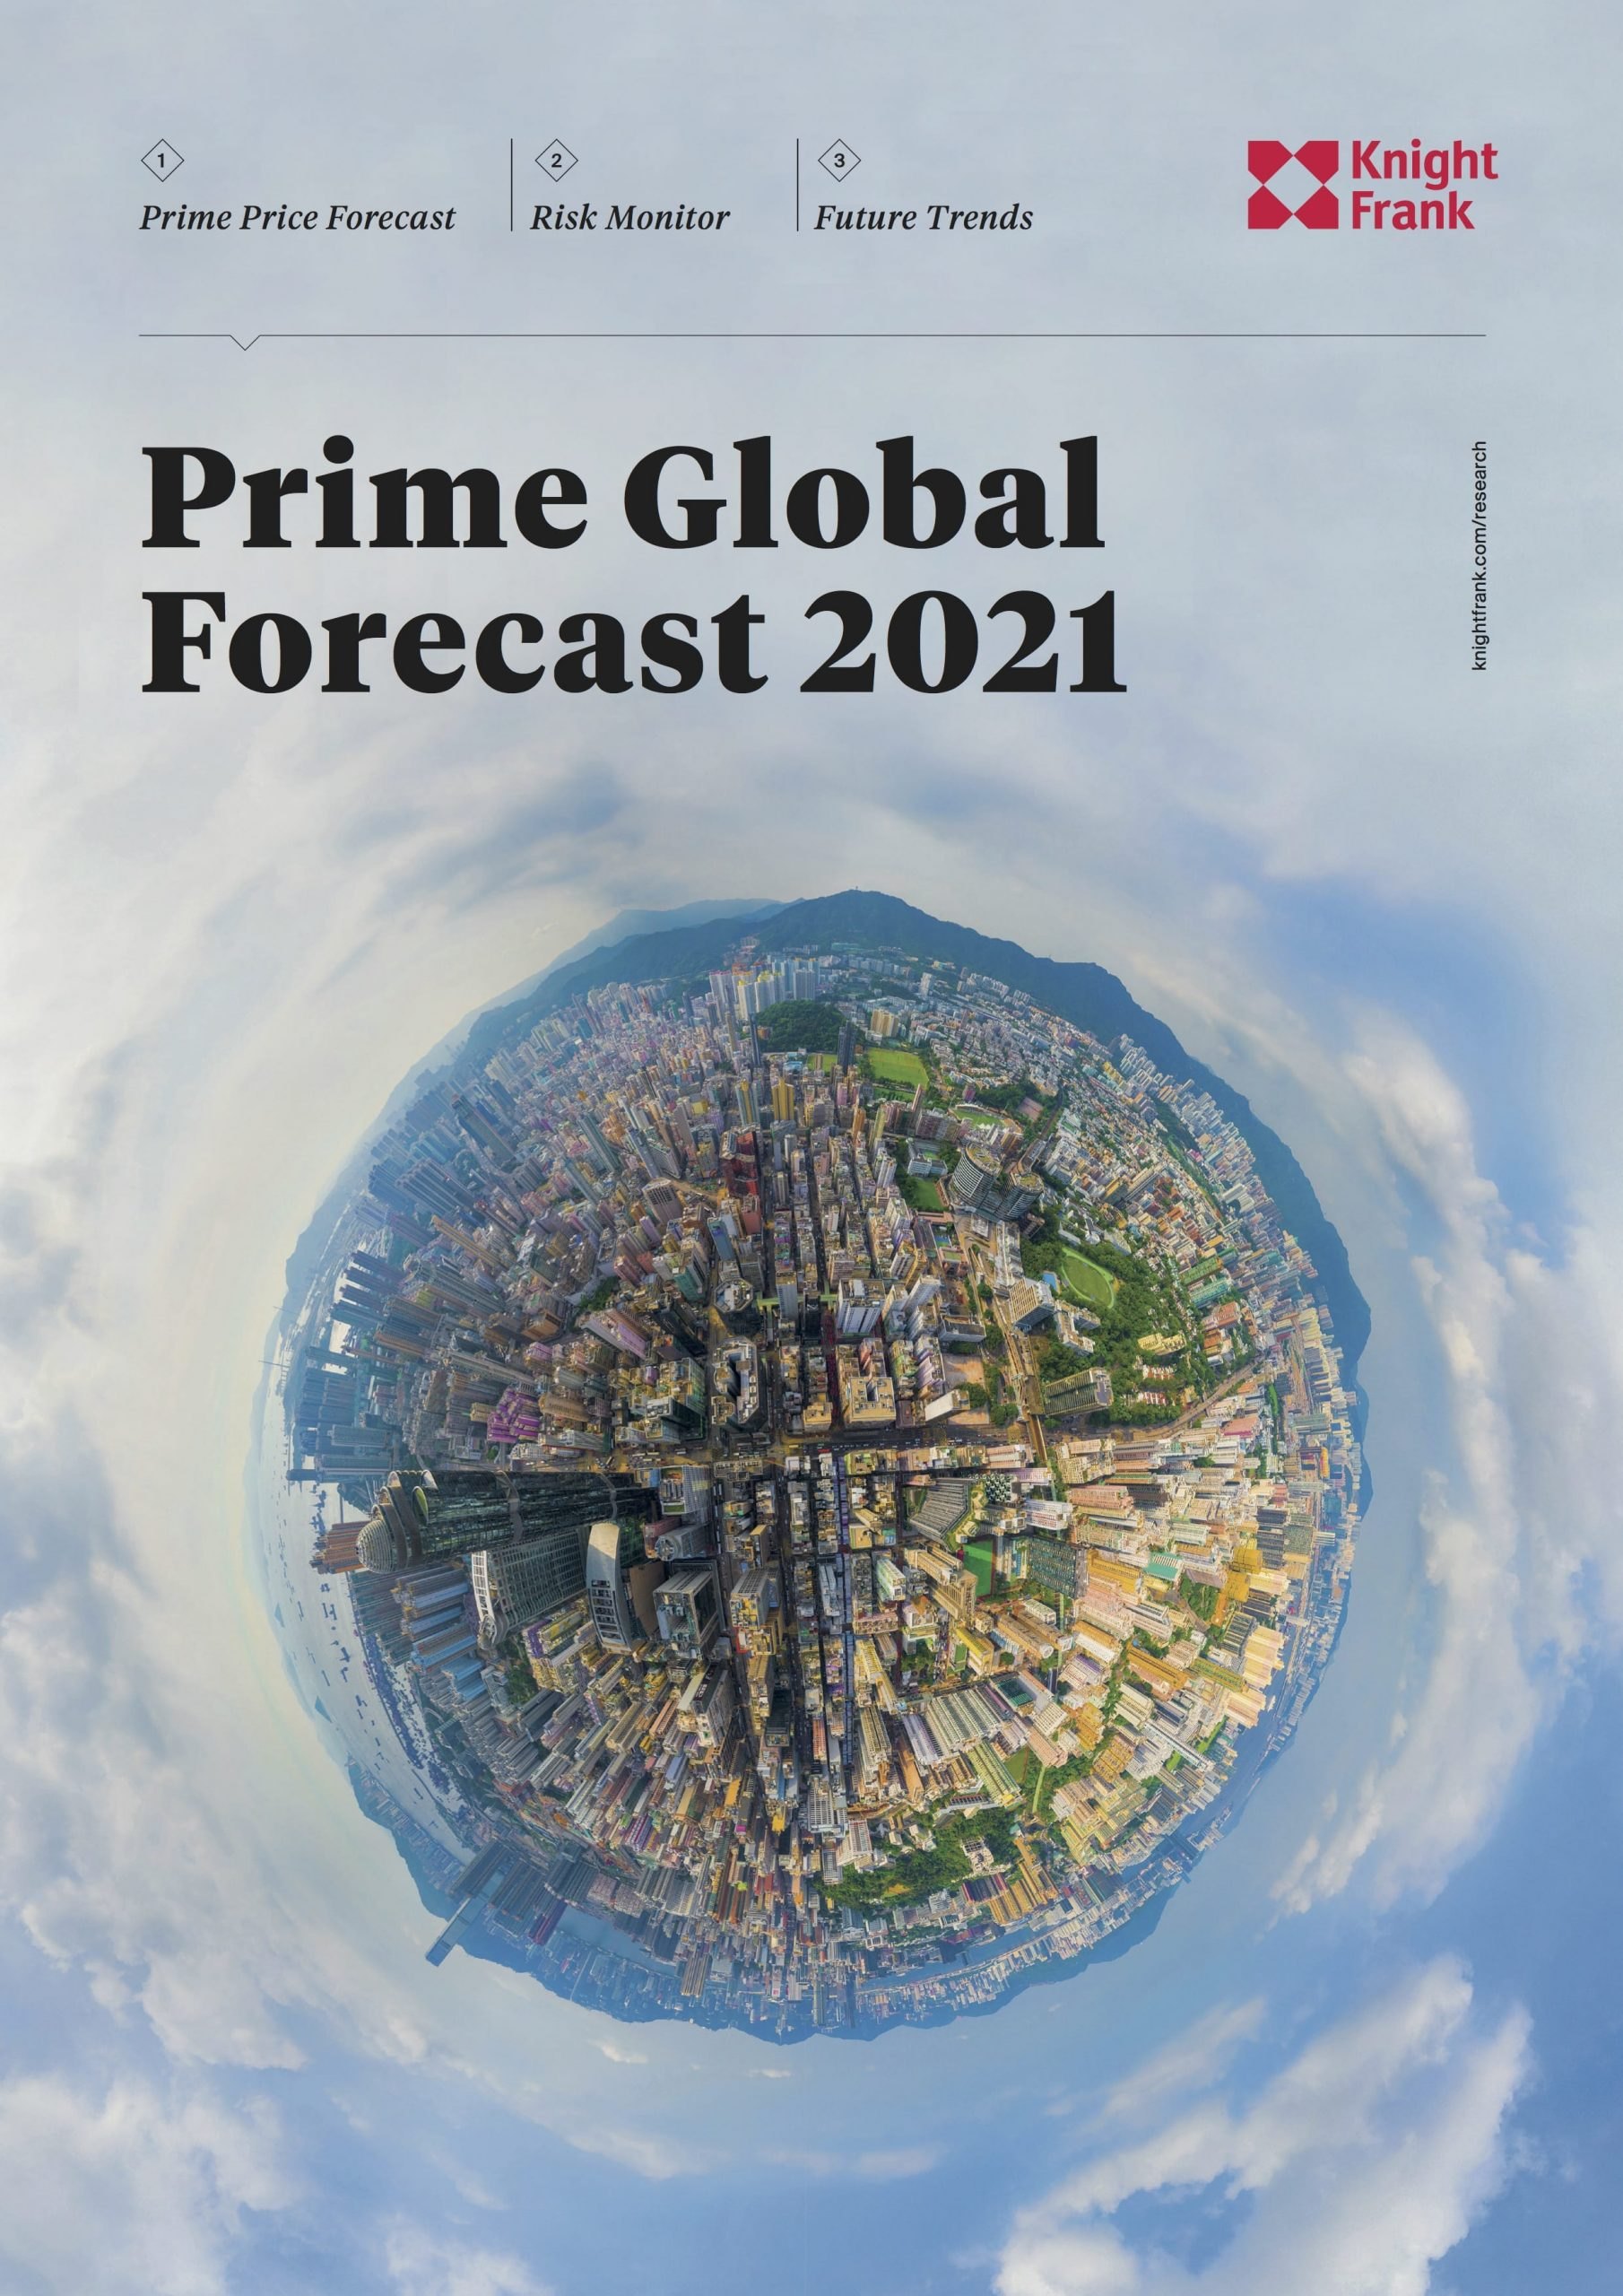 Knight Frank’s Prime Global Forecast for 2021